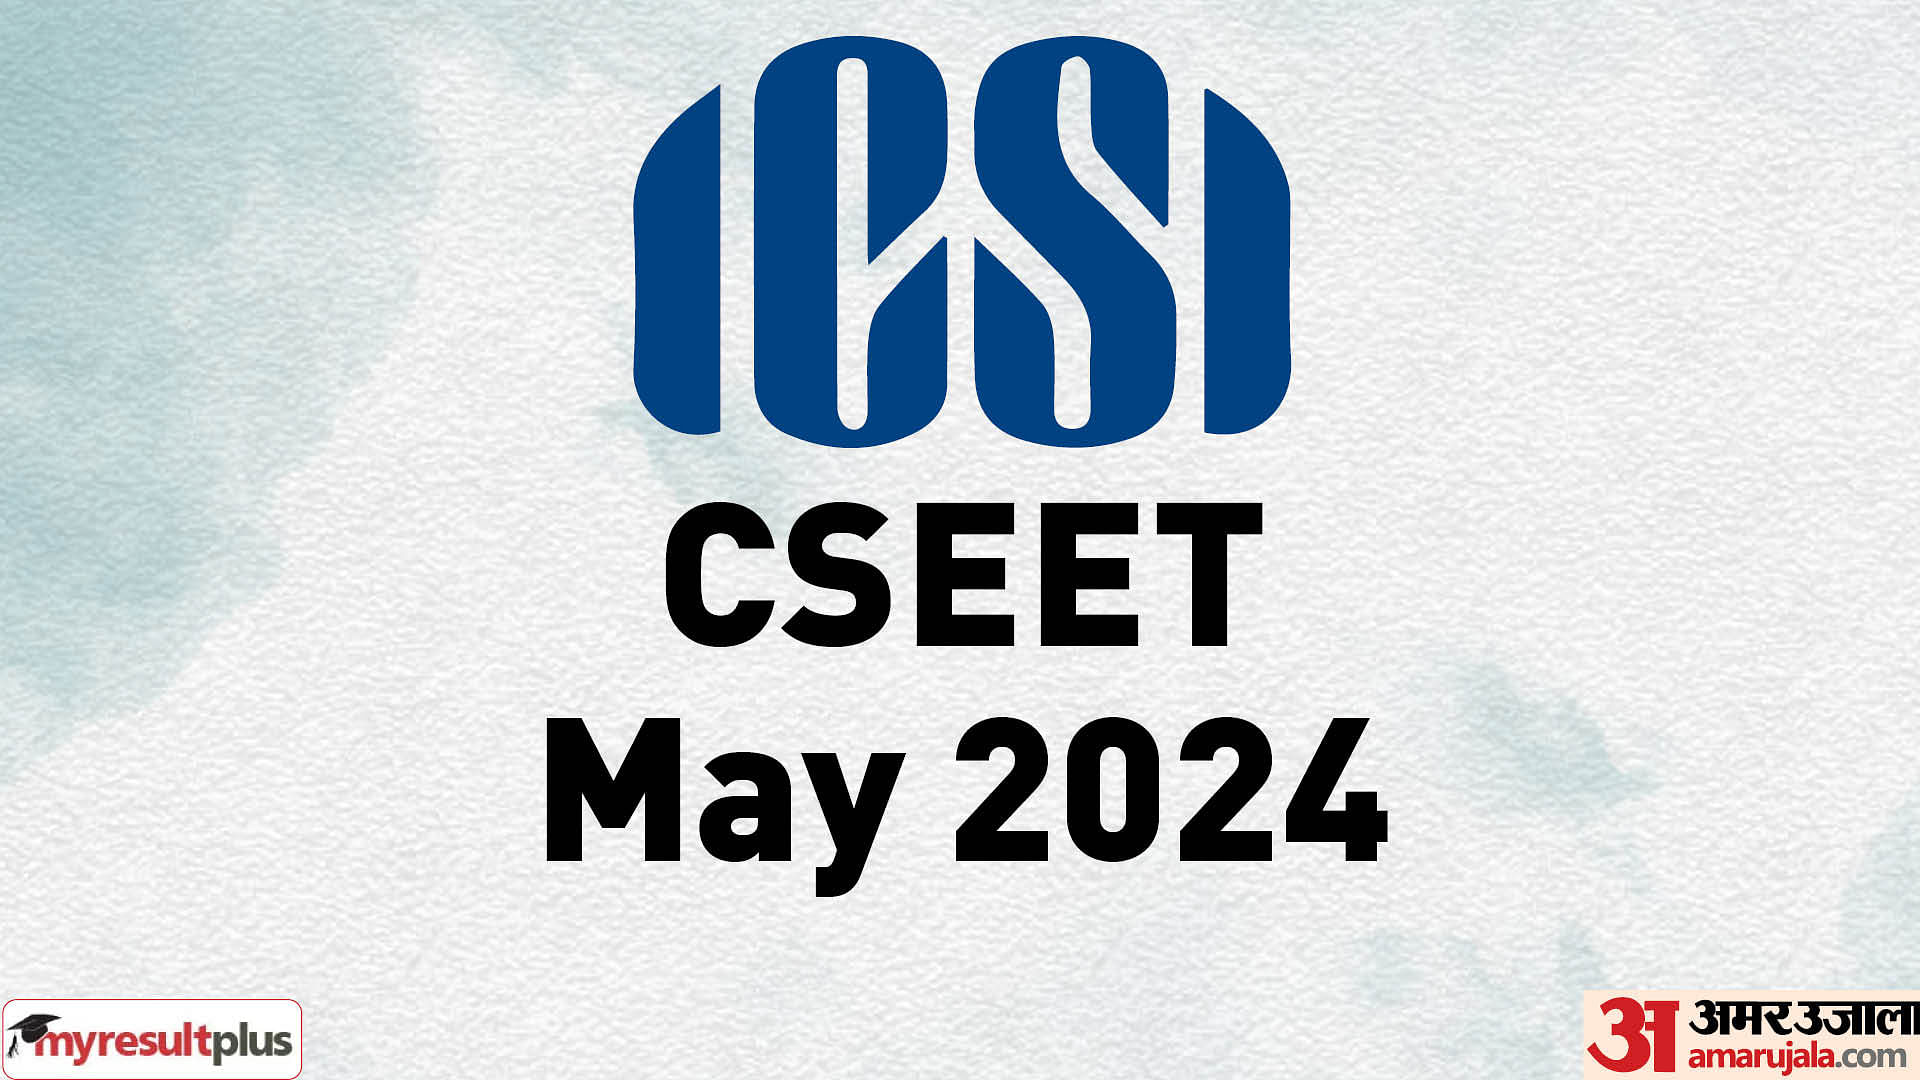 ICSI CSEET May 2024 Result declared, Check how to download and passing criteria here